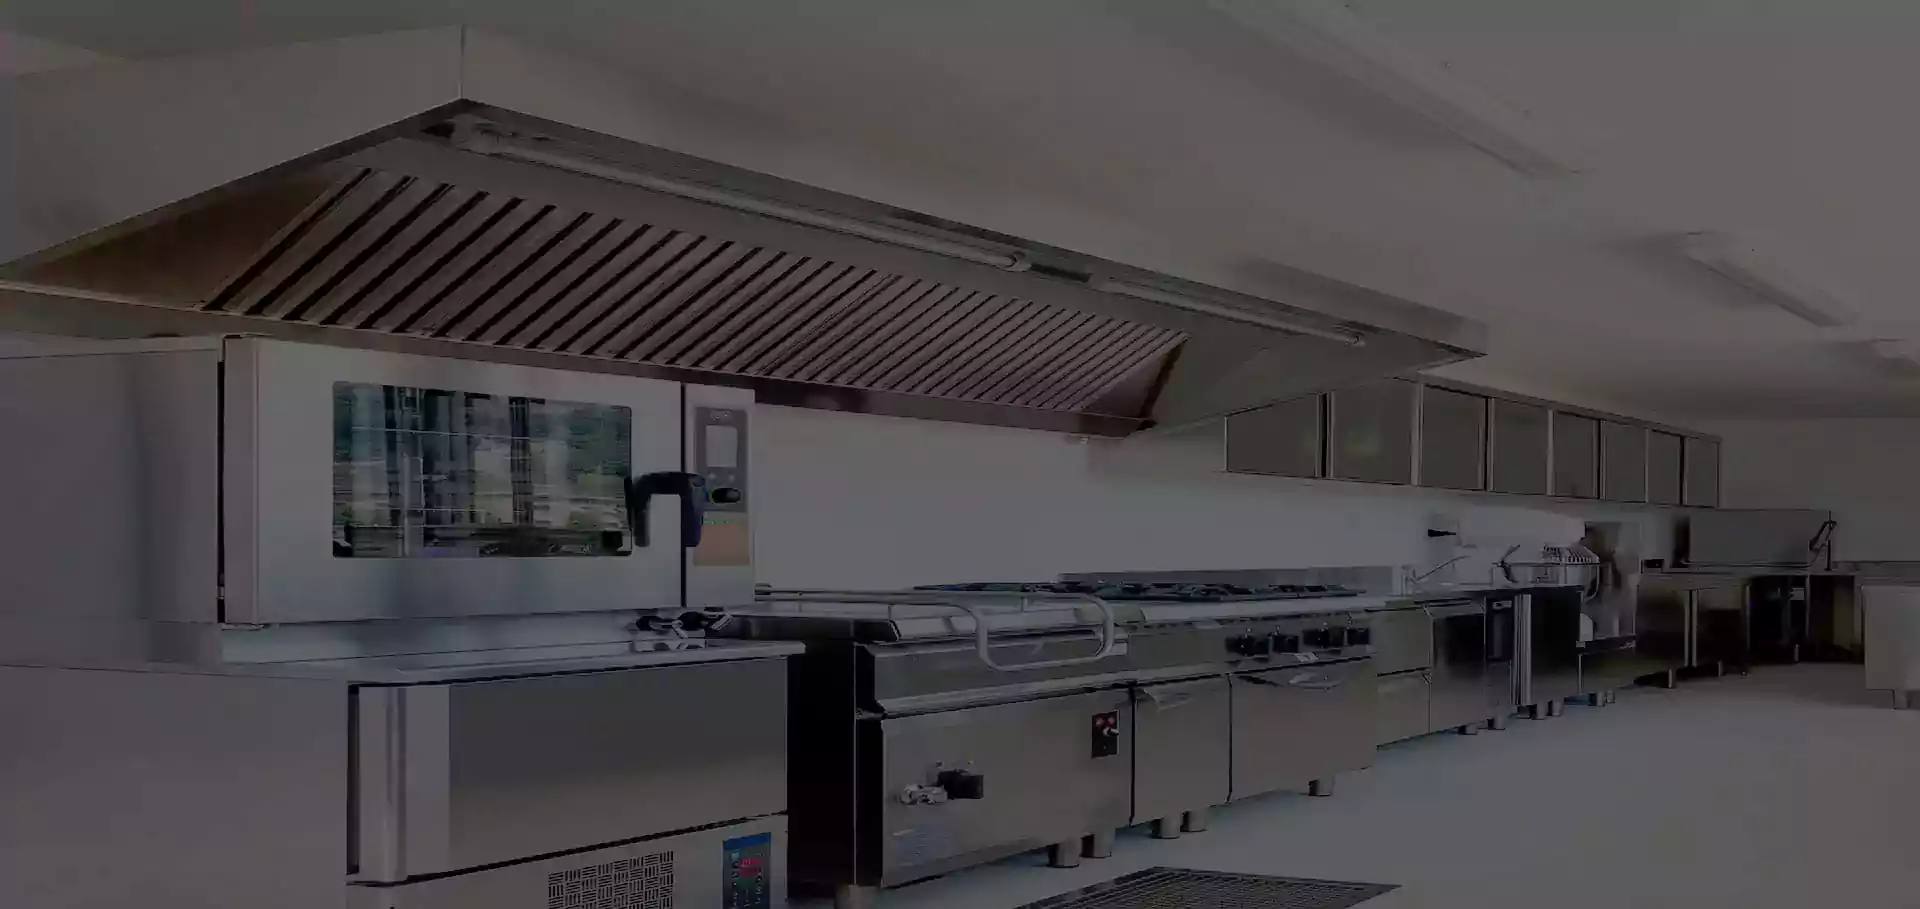 Kitchen Cleaning Melbourne Commercial Kitchen Cleaning Canopy Exhaust Duct Cleaning Melbourne